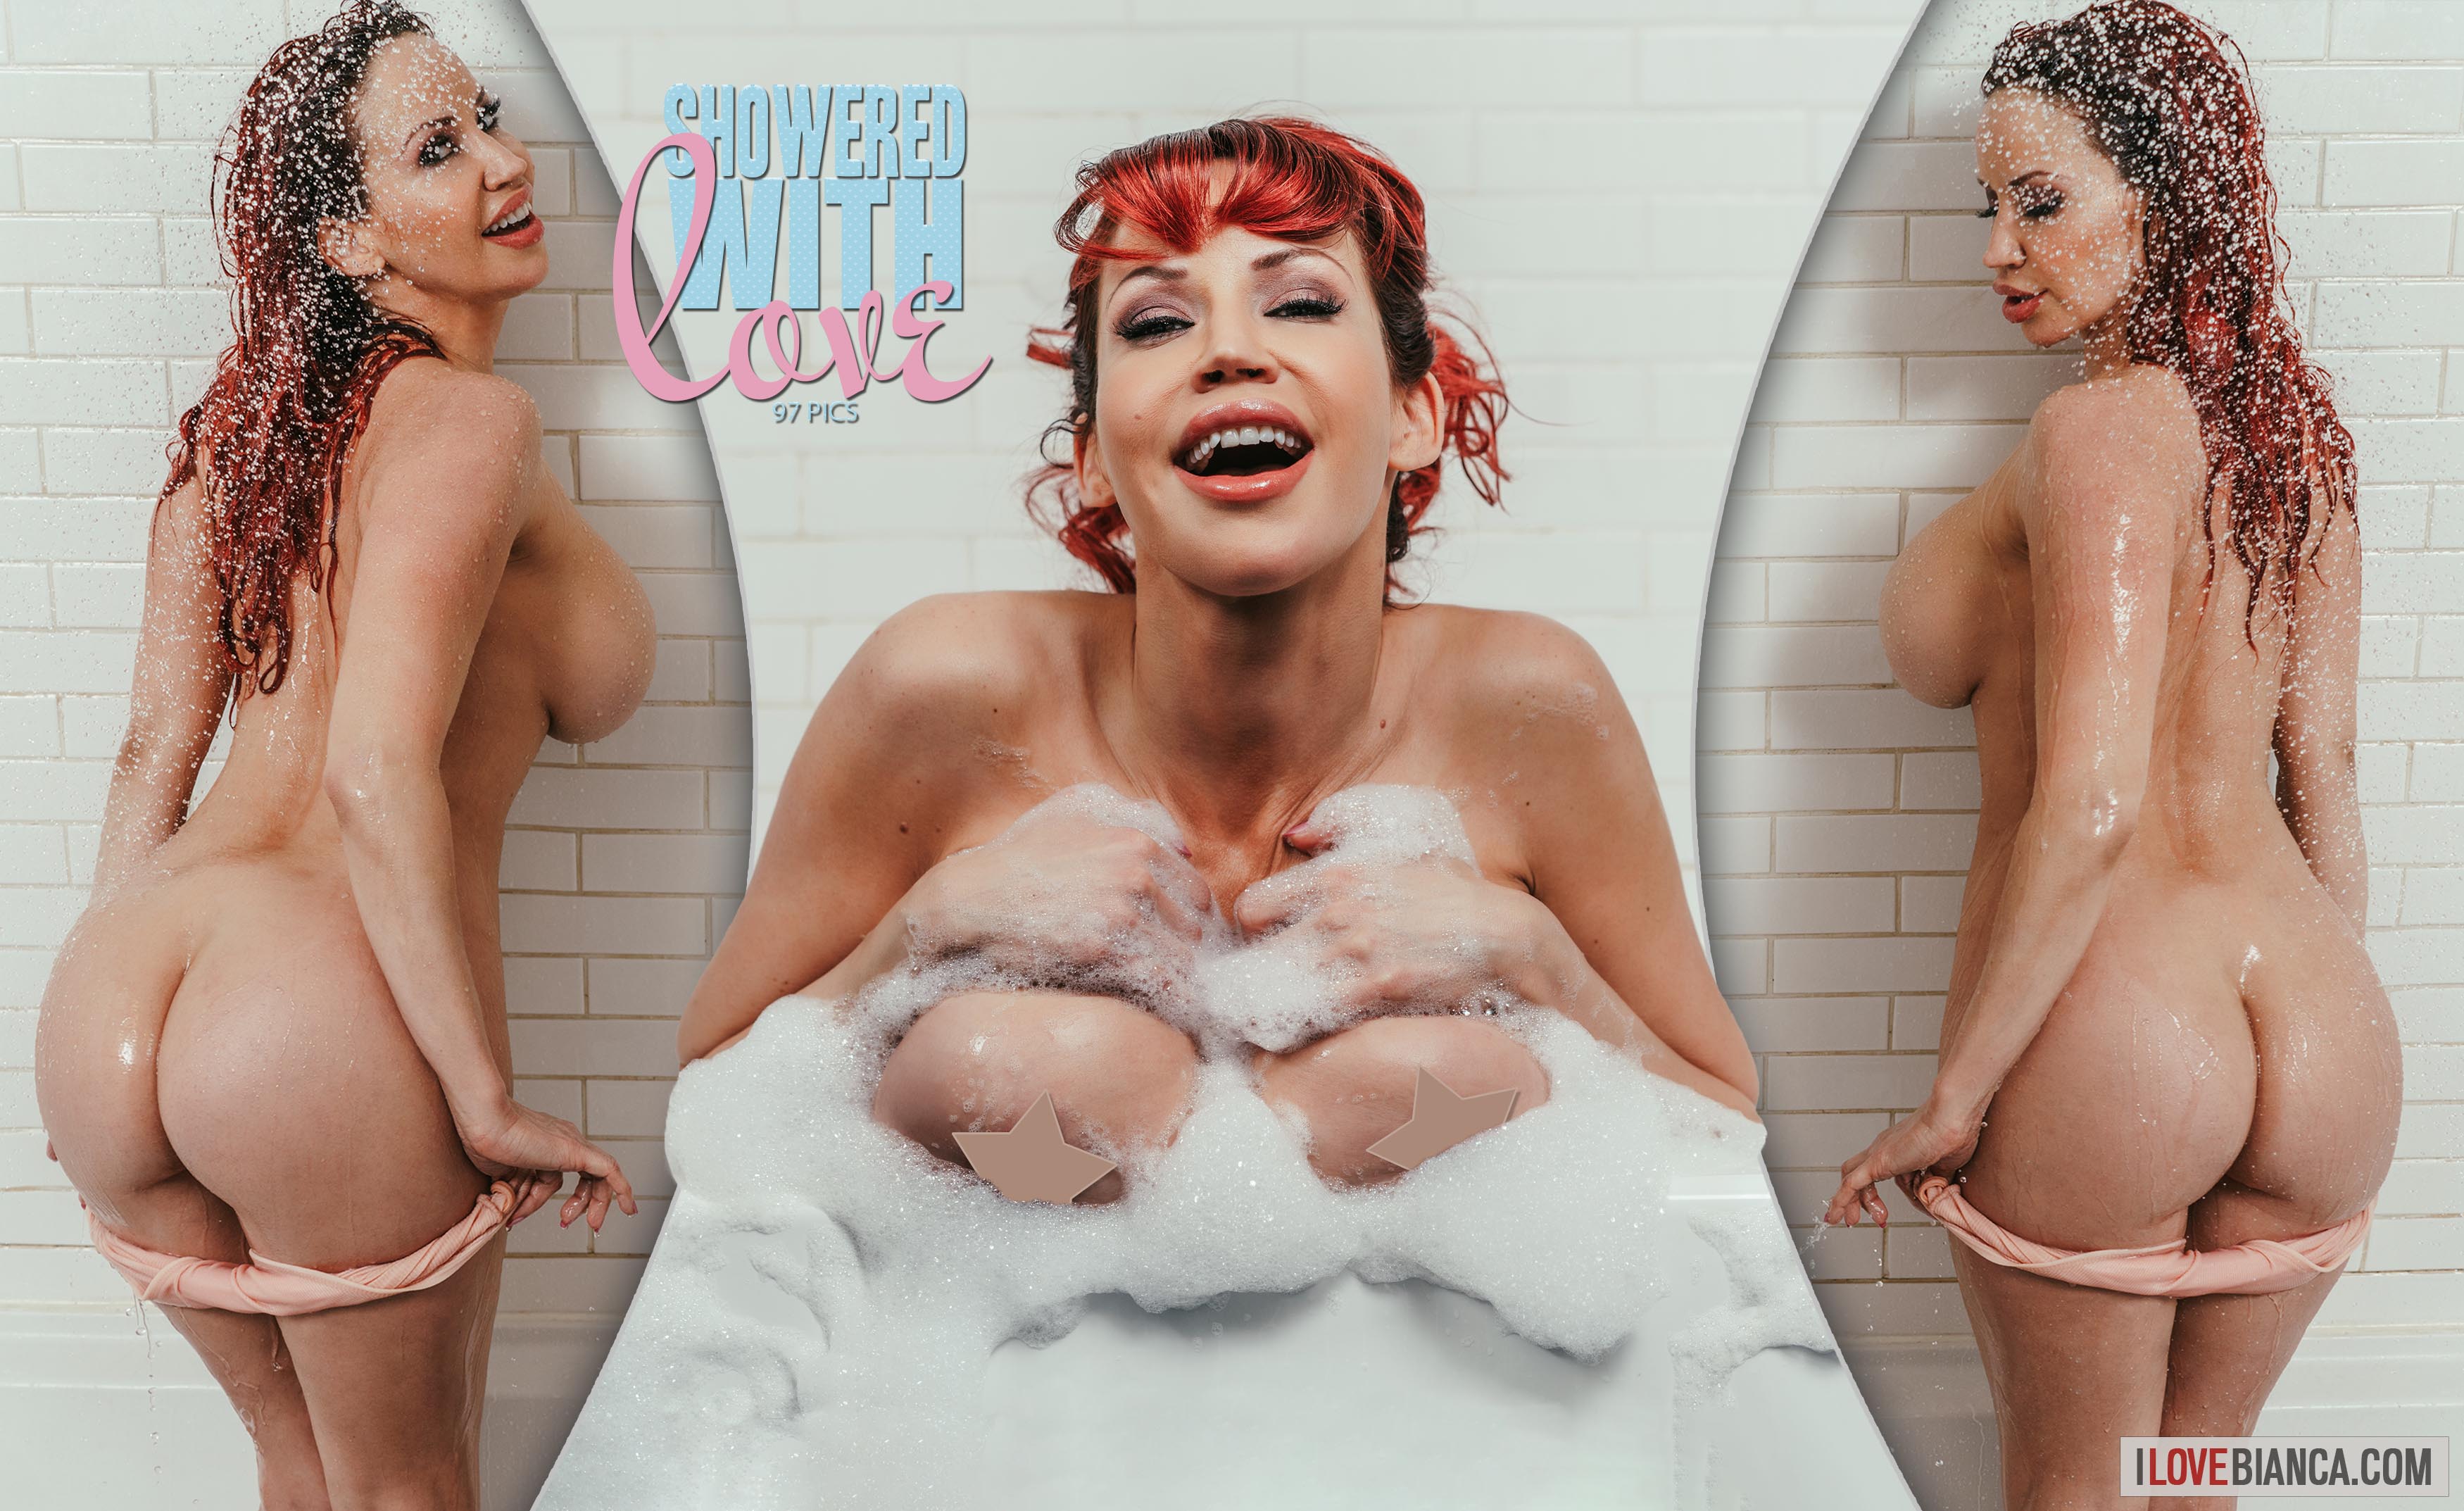 09 showered with love covers 05